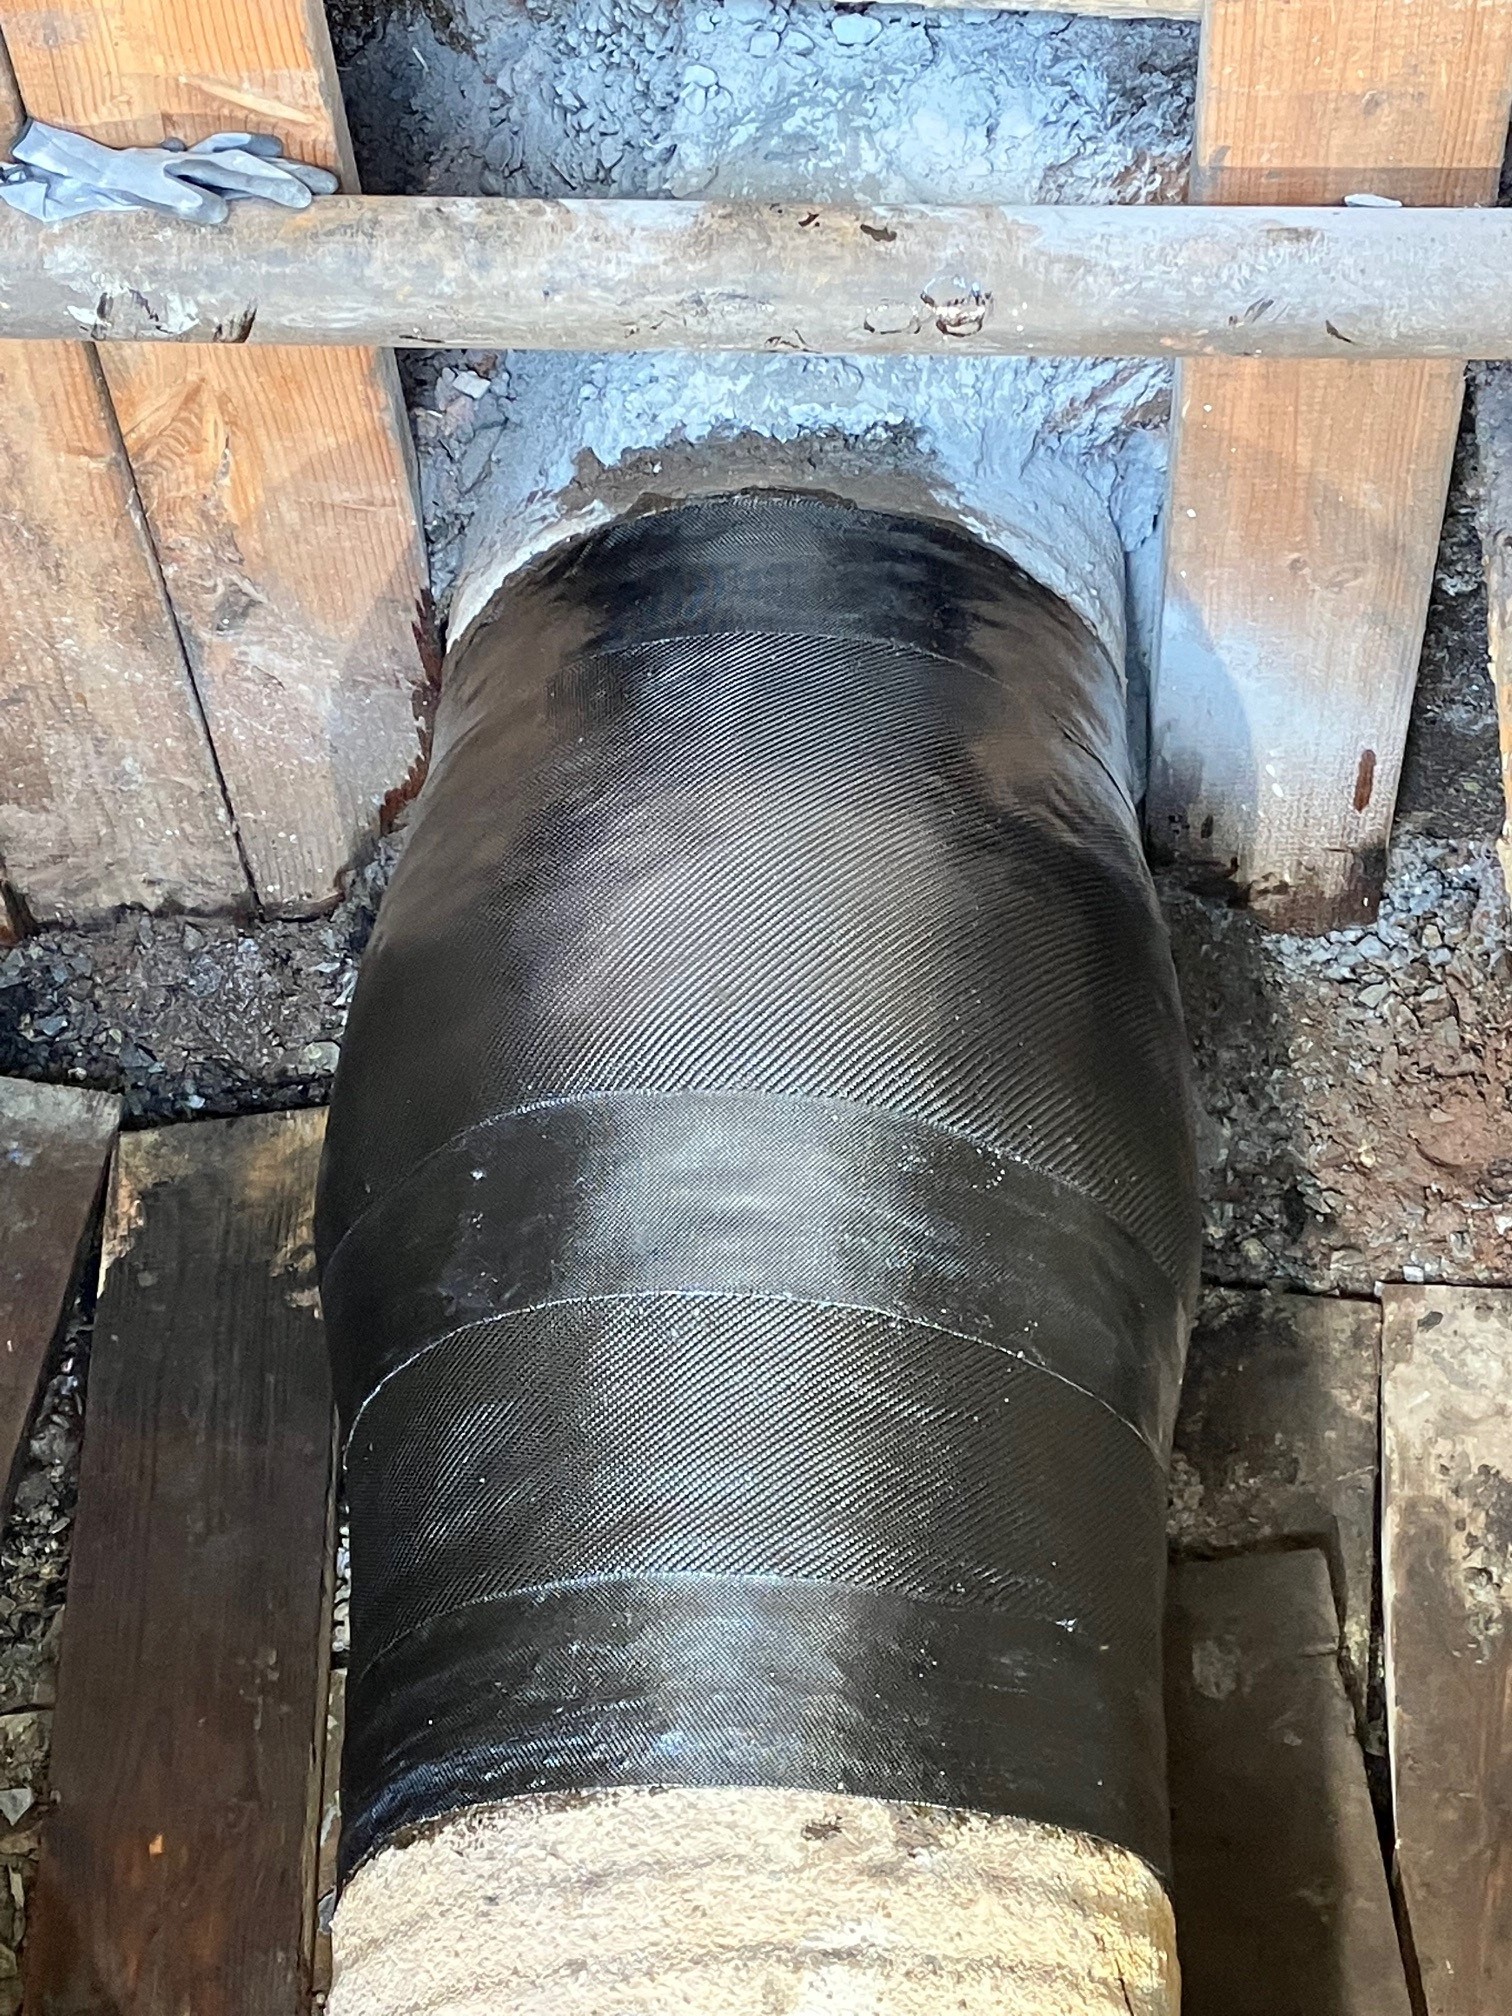 Bird's eye view of a large pipe with black composite wrap around the pipeline.